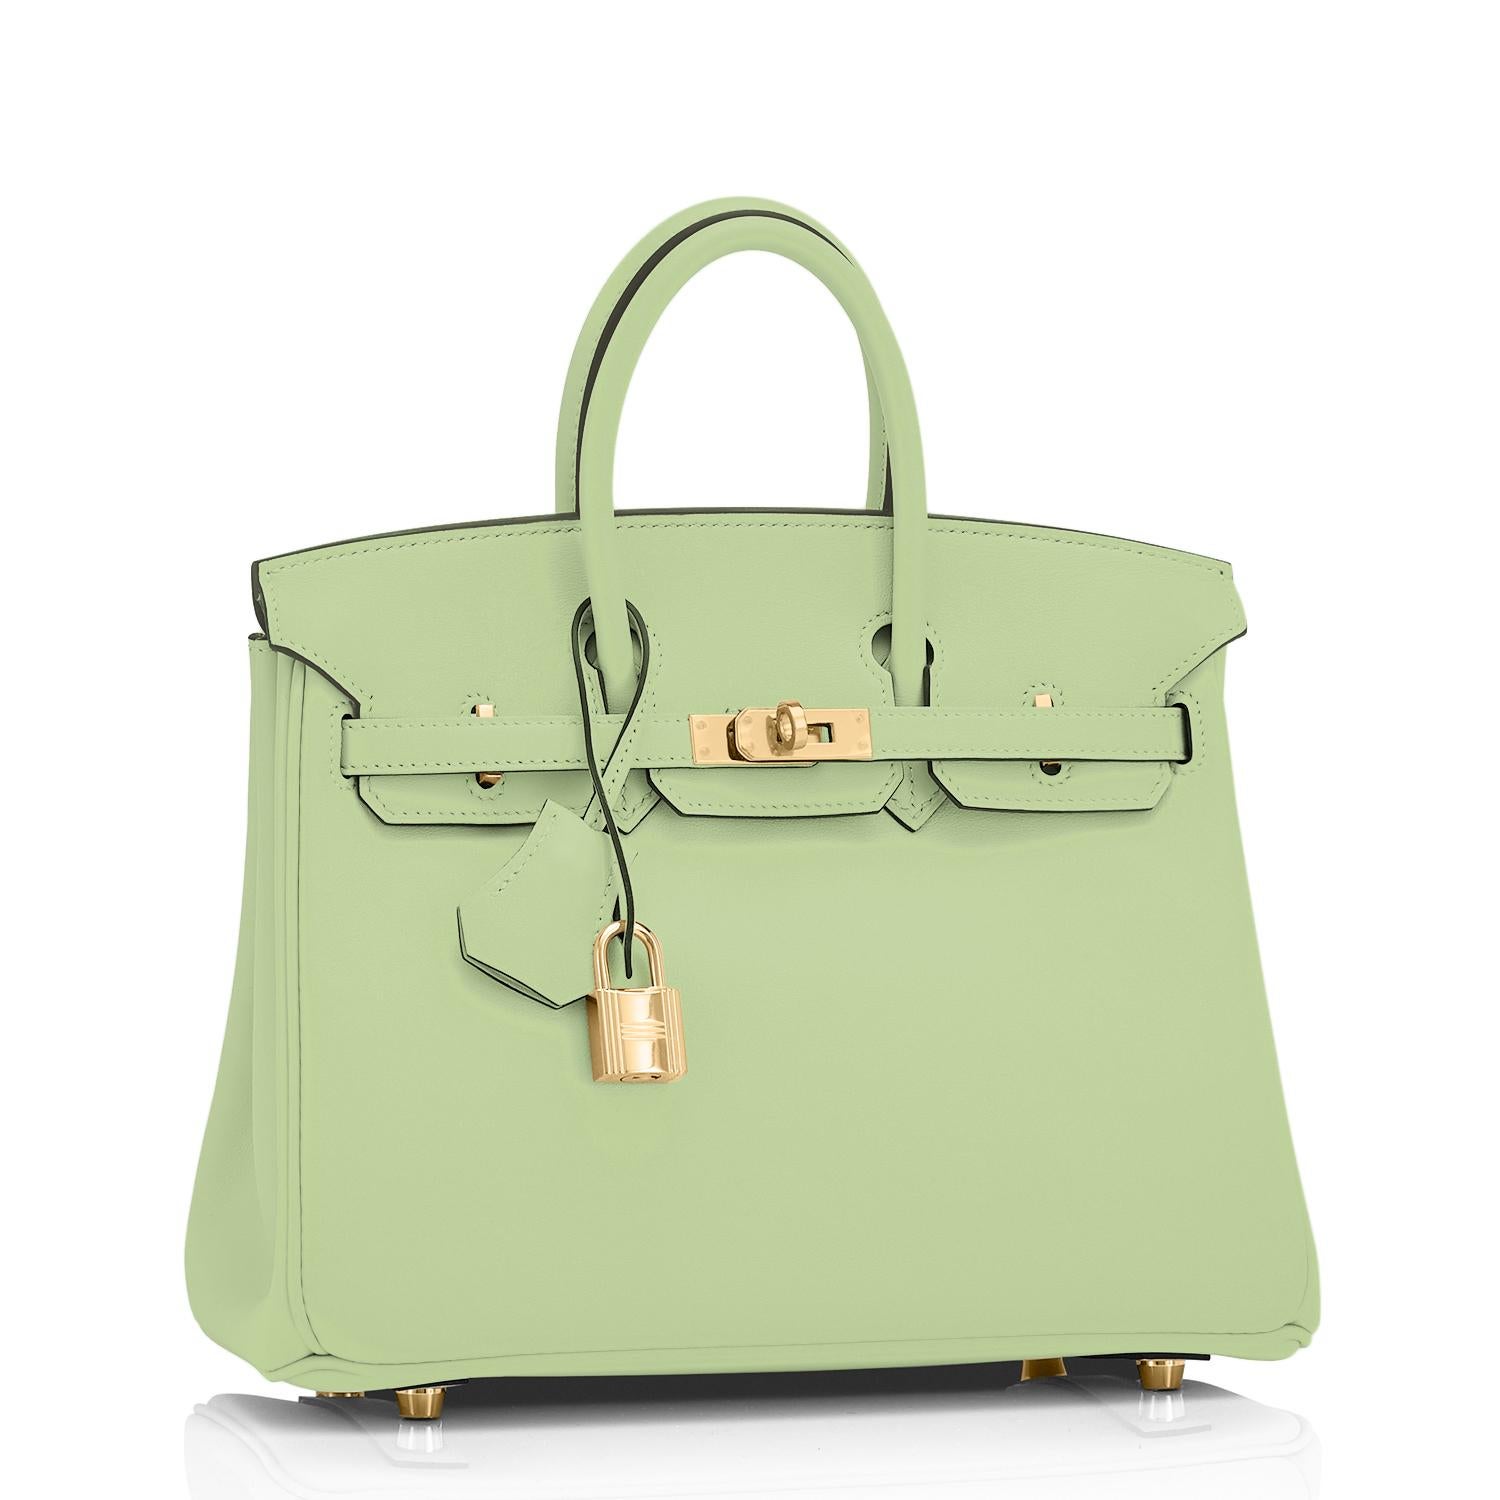 Hermes Birkin 25 Vert Criquet Fresh Green Bag Gold Hardware Y Stamp, 2020
Superb new pale green from Hermes- fresh and so on point for spring summer!
Brand New in Box. Store Fresh. Pristine Condition (with plastic on hardware) 
Just purchased from